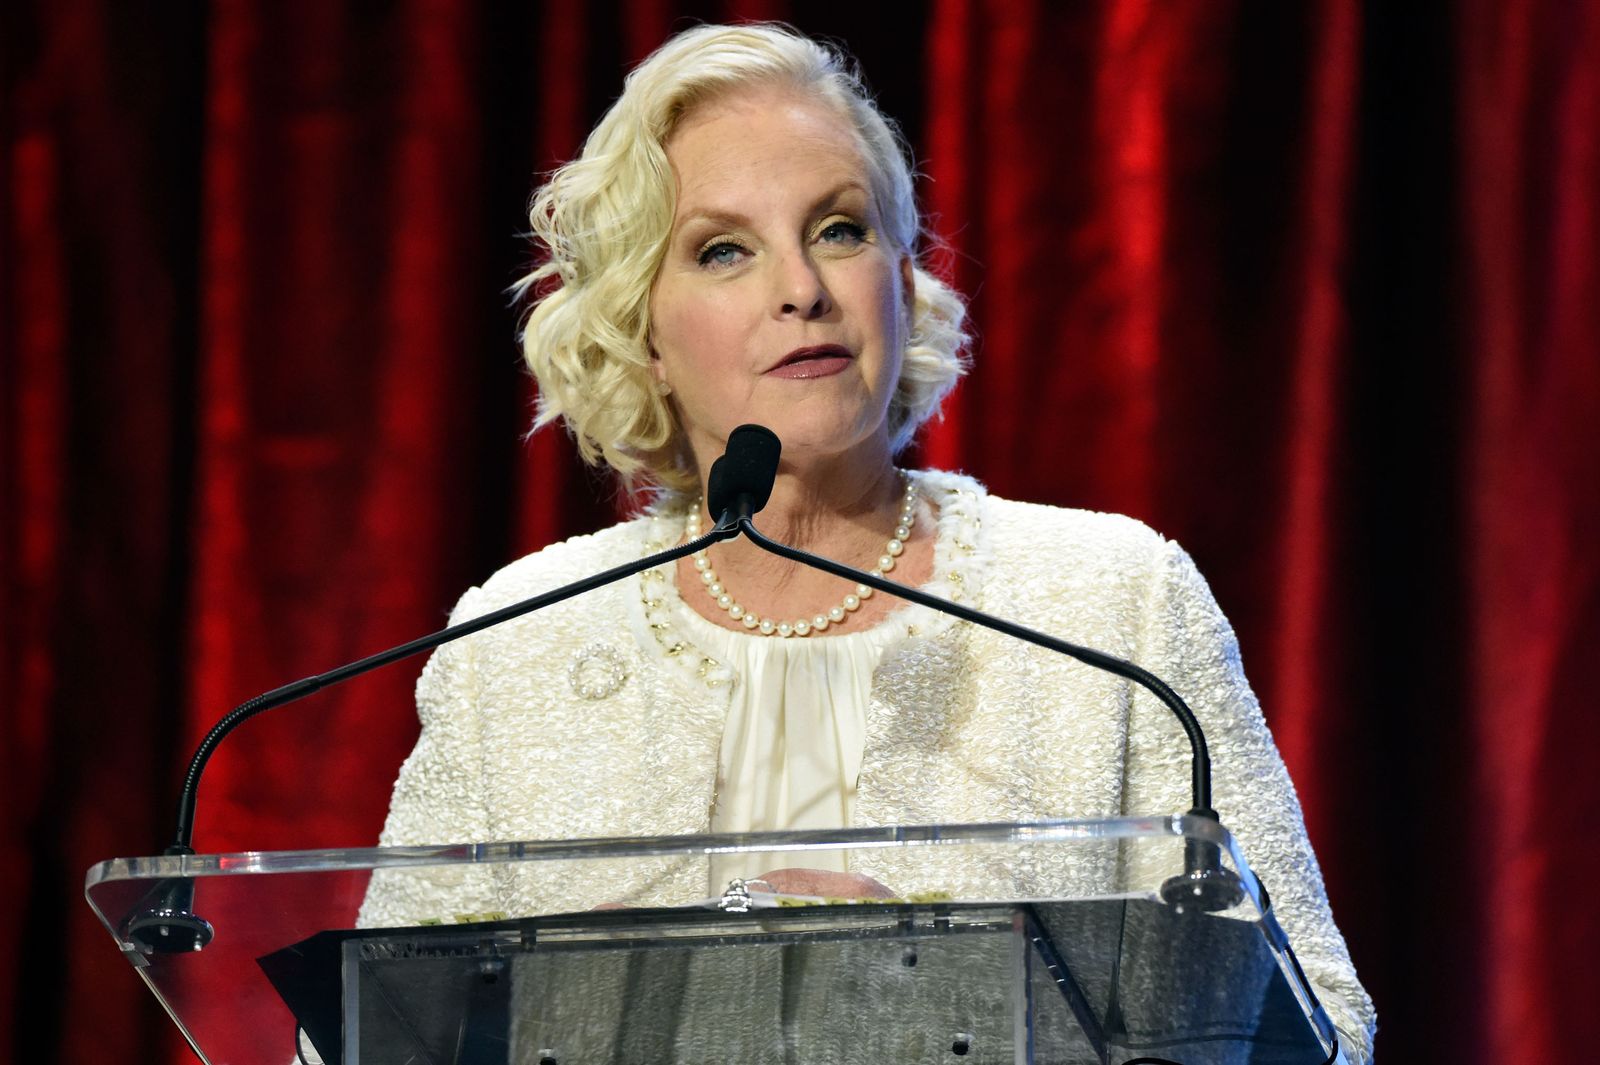 Cindy McCain at the Muhammad Ali Humanitarian Awards at Marriott Louisville Downtown on September 17, 2016. | Photo: Getty Images